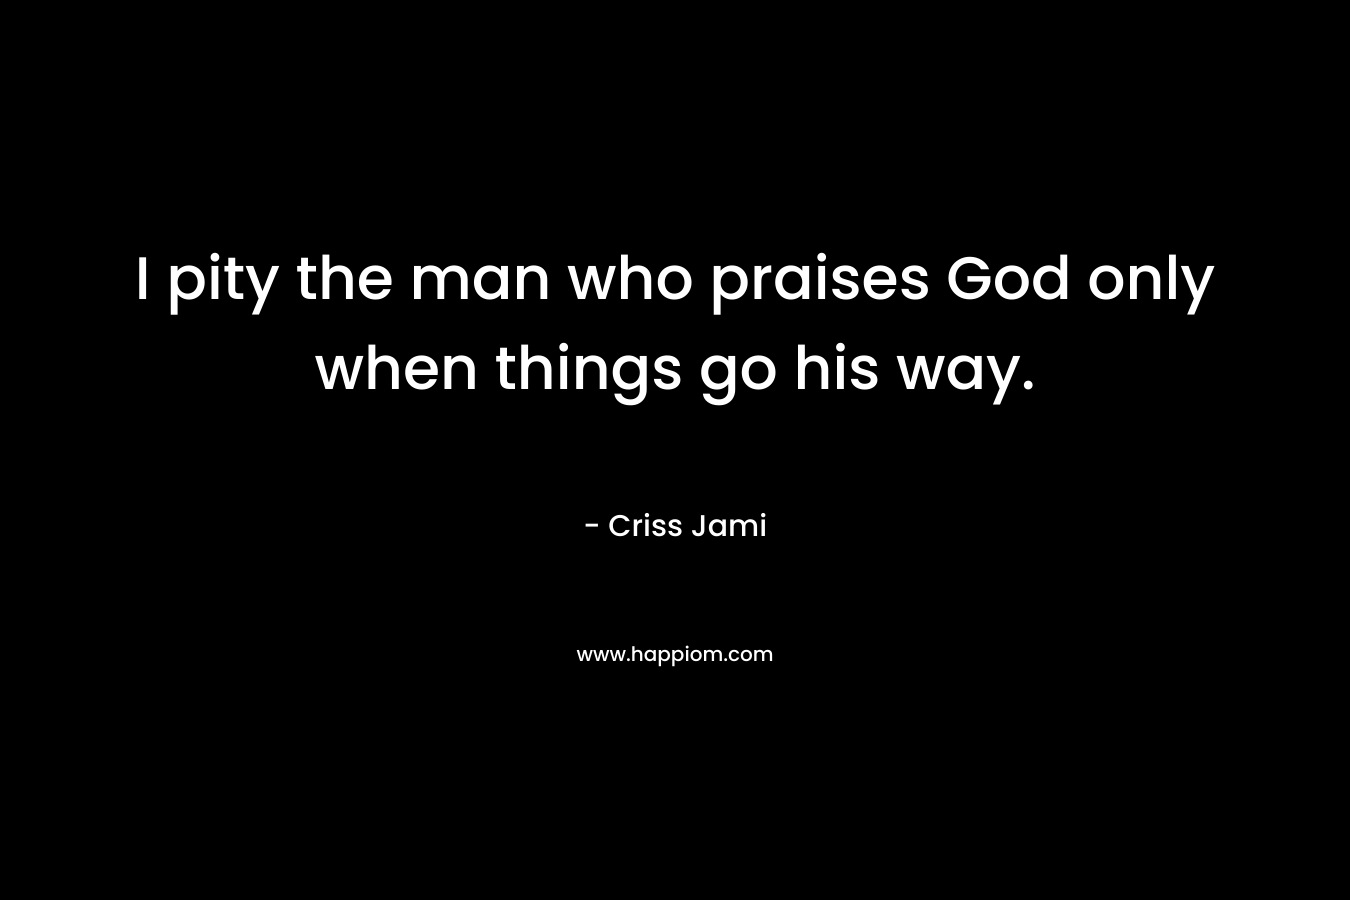 I pity the man who praises God only when things go his way. – Criss Jami